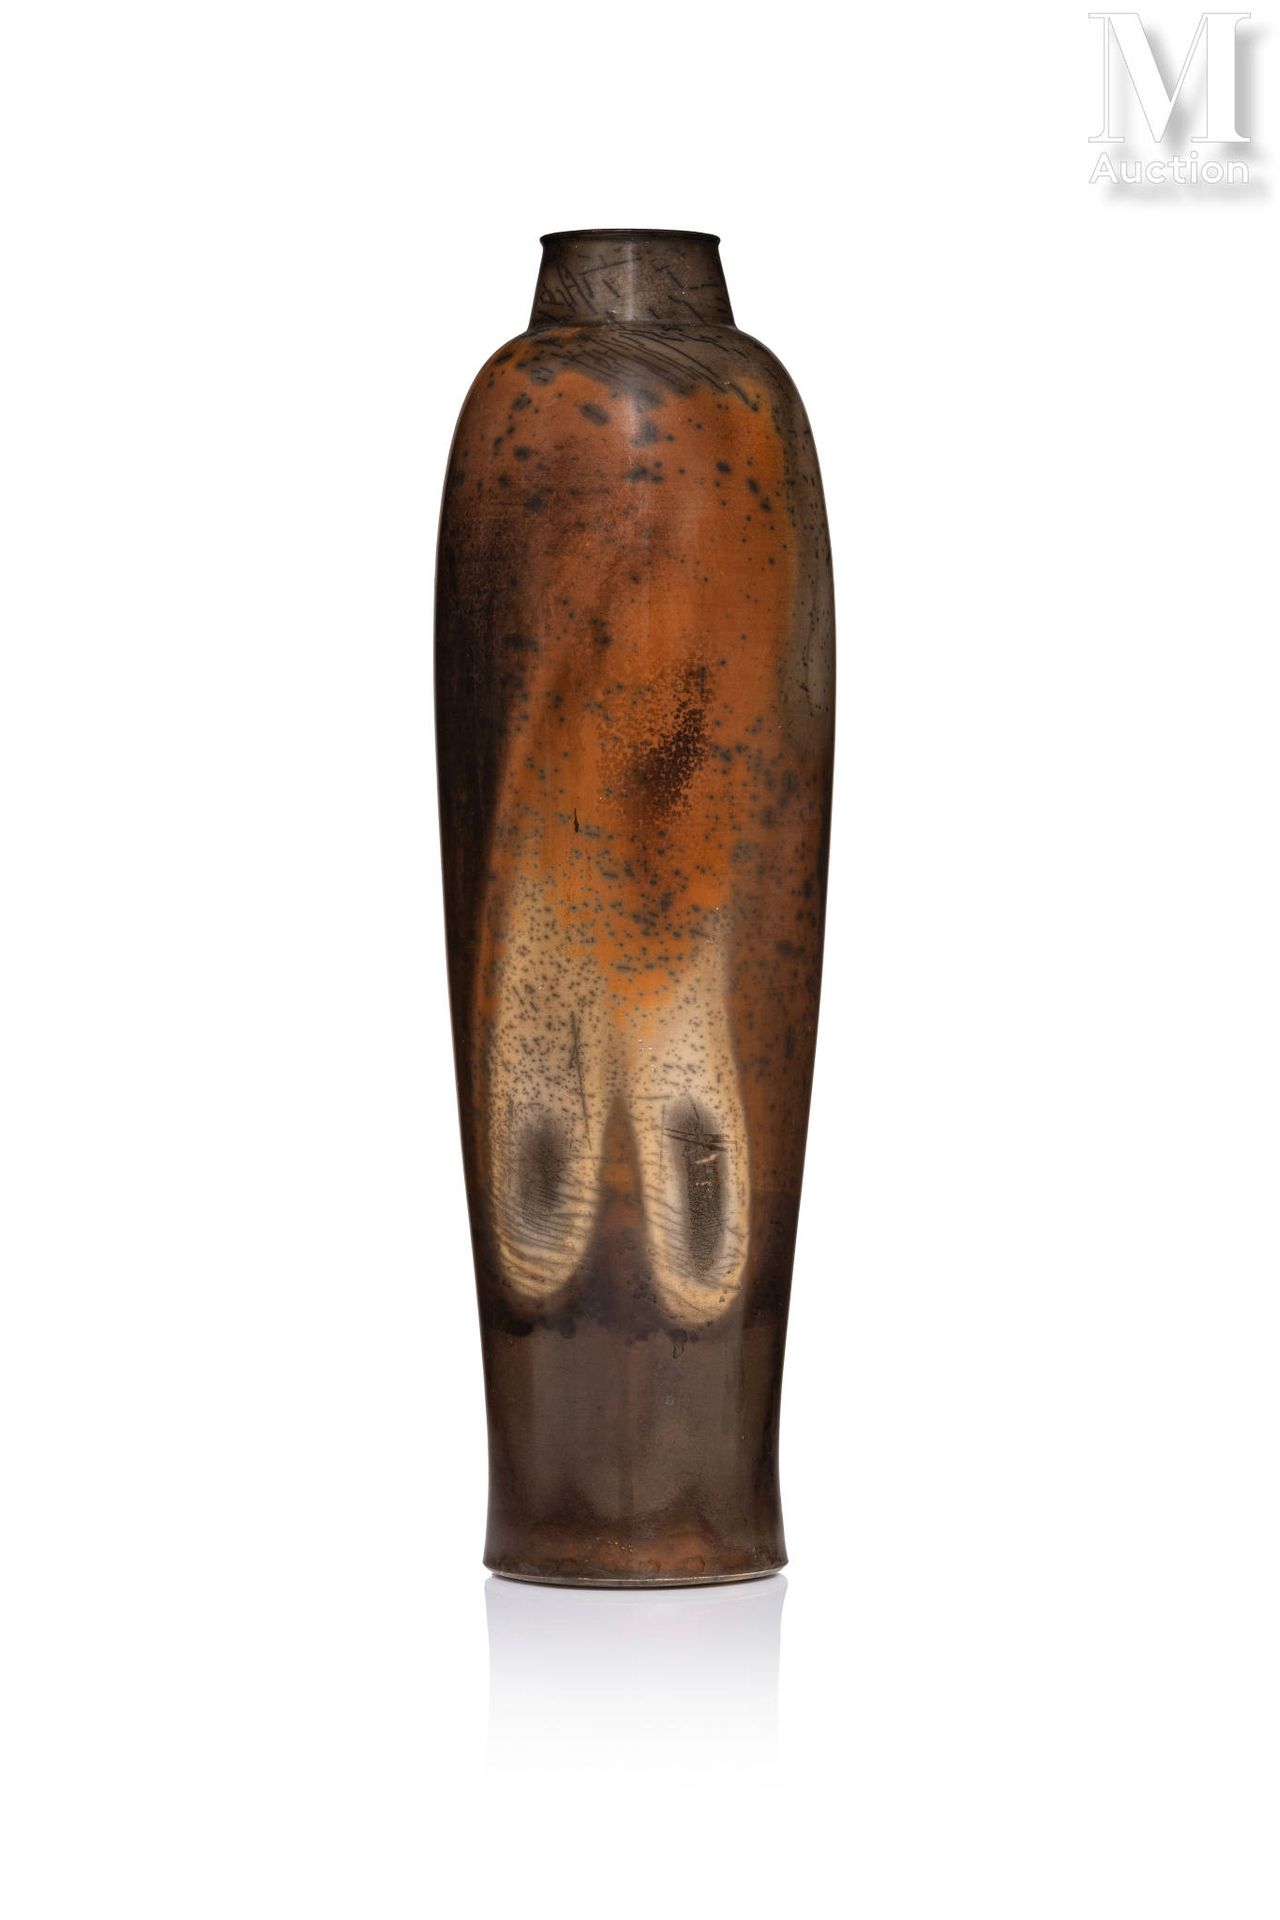 Pierre BAYLE (1945 - 2004) An ovoid vase with a narrow neck in brown and shaded &hellip;